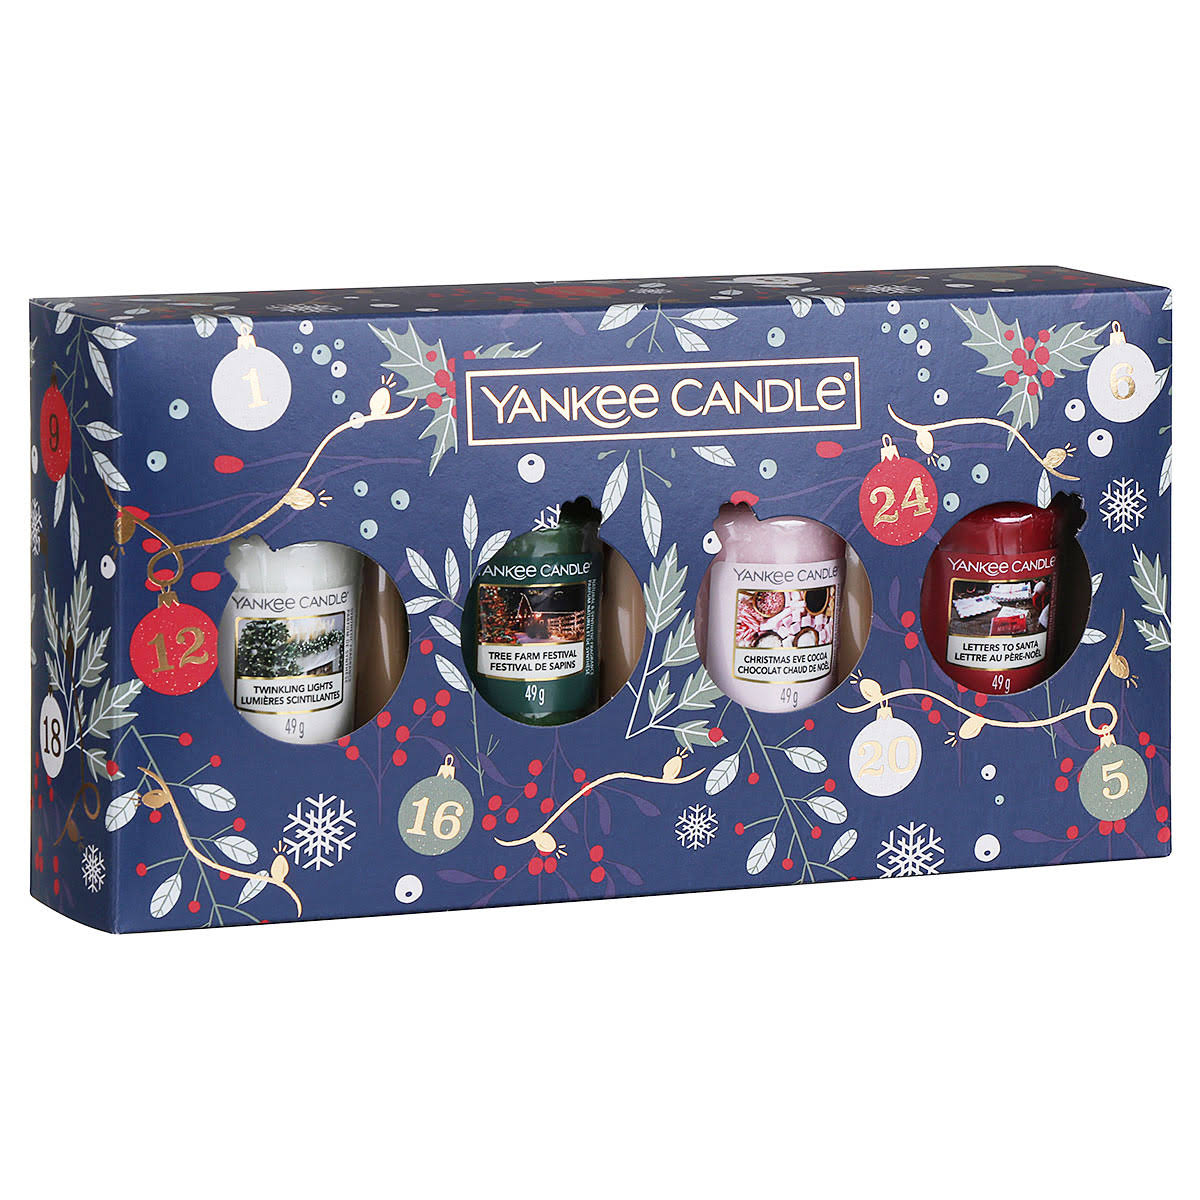 Yankee Candle Countdown to Christmas Four Sampler Votive Gift Set